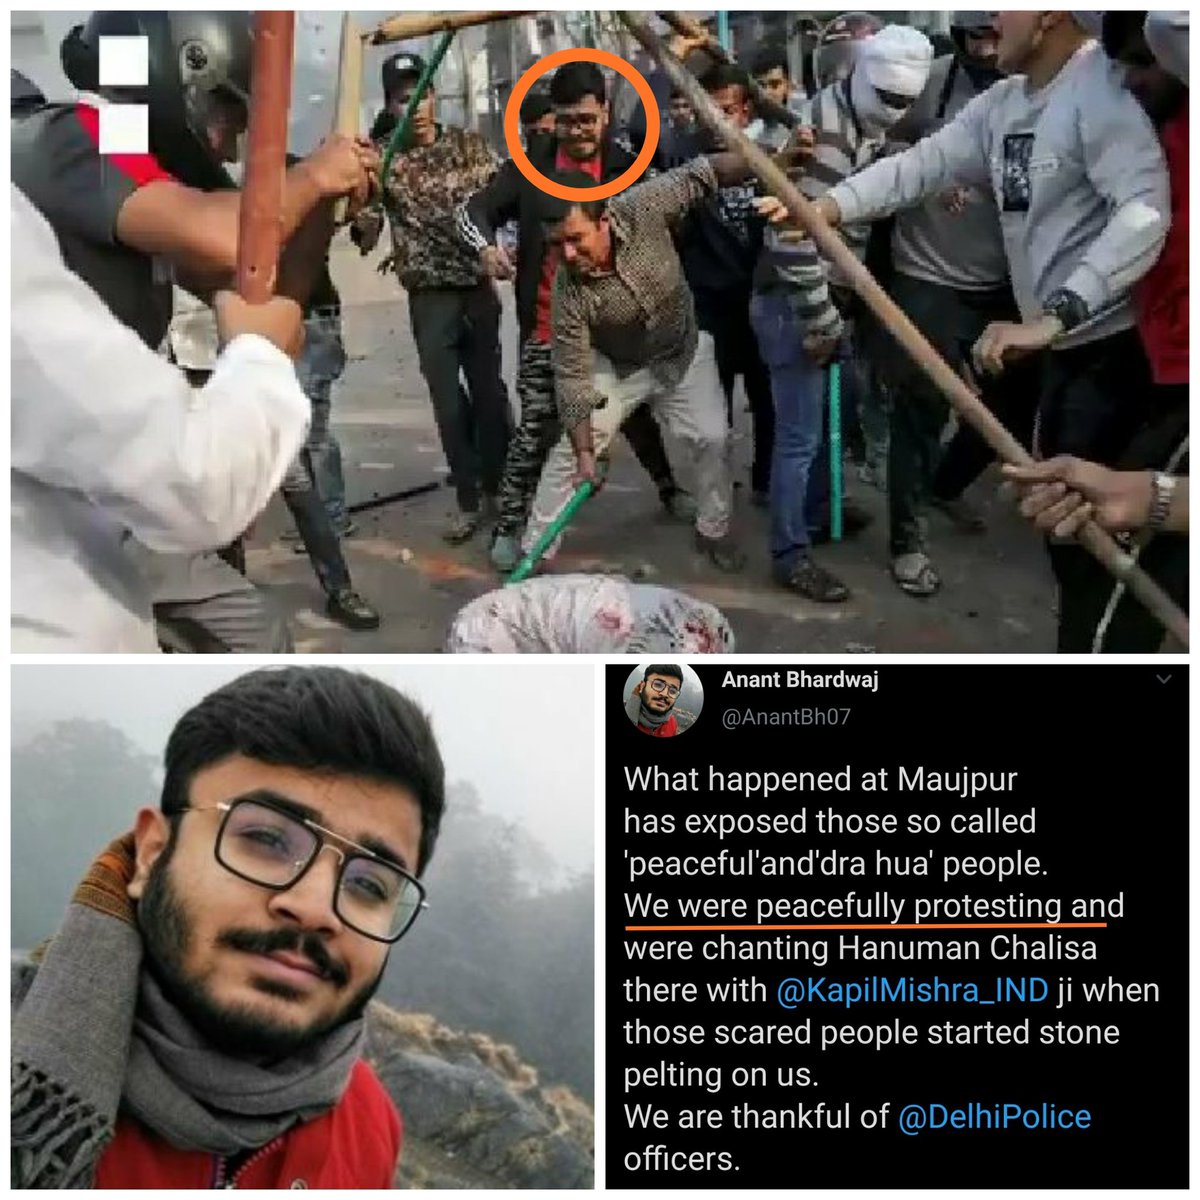 Umar Khalid's role in Delhi Riots is well documented. A thread exposing him and what role he played during the violence 